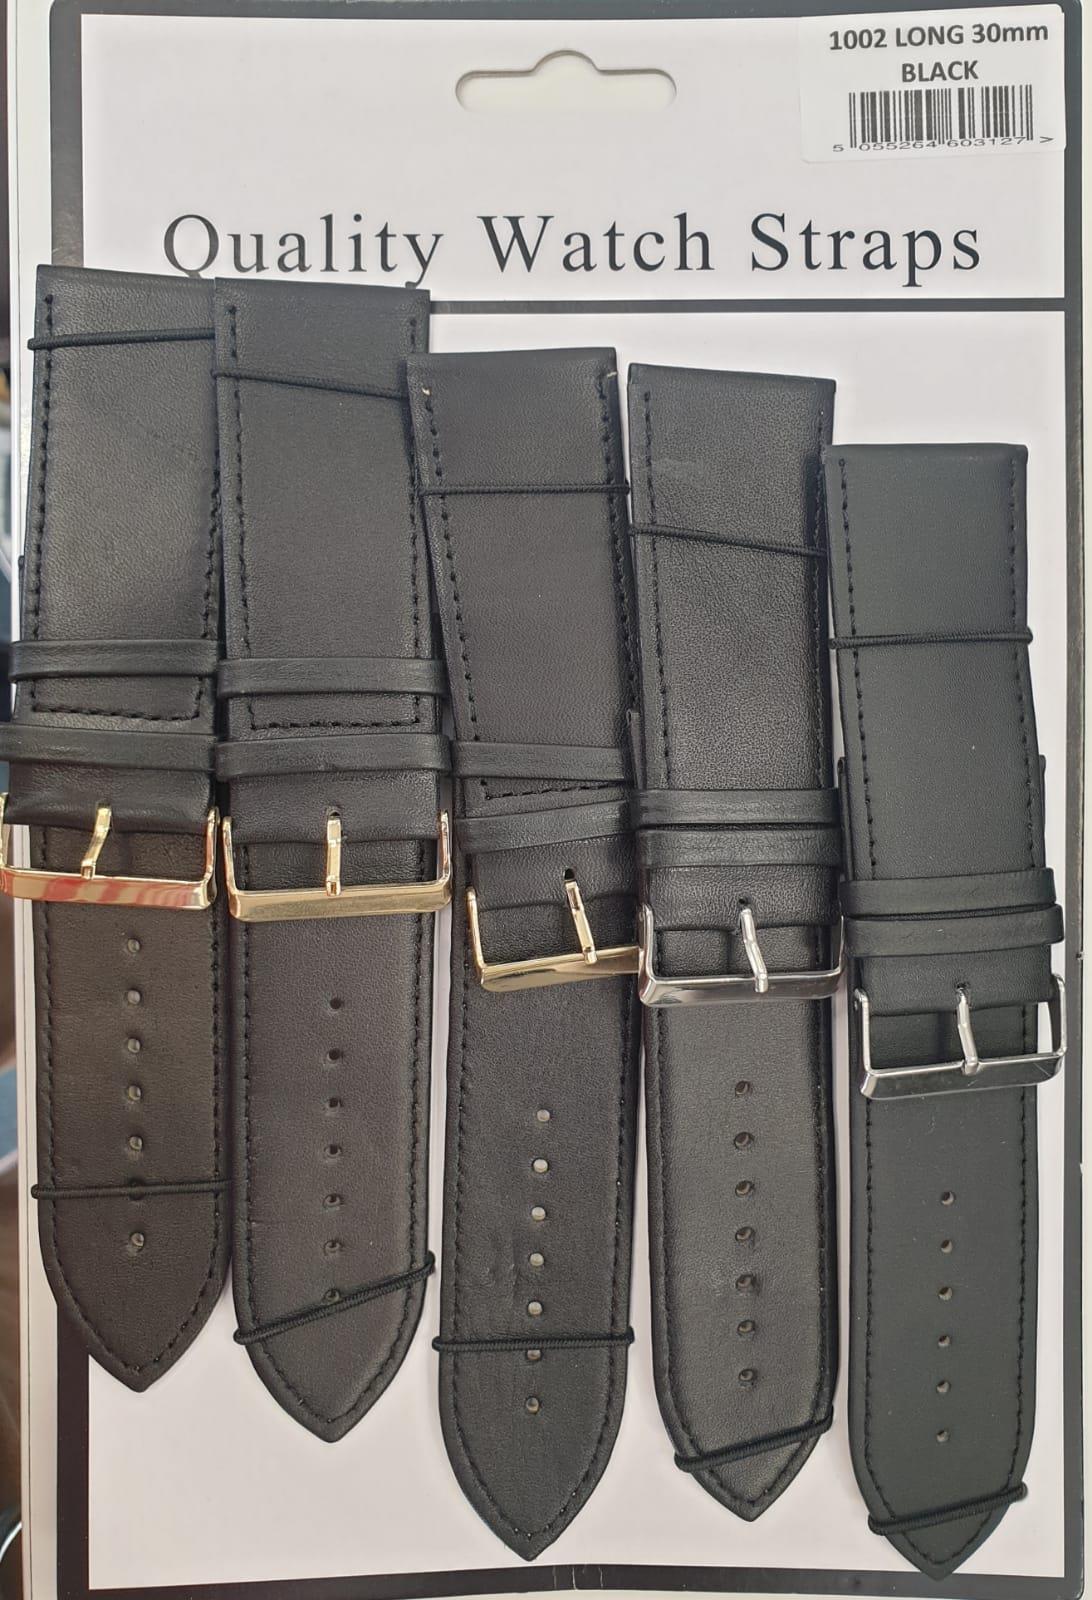 Black Leather Extra Long Watch Straps Pk10 Available sizes 6mm - 30mm 1002BK